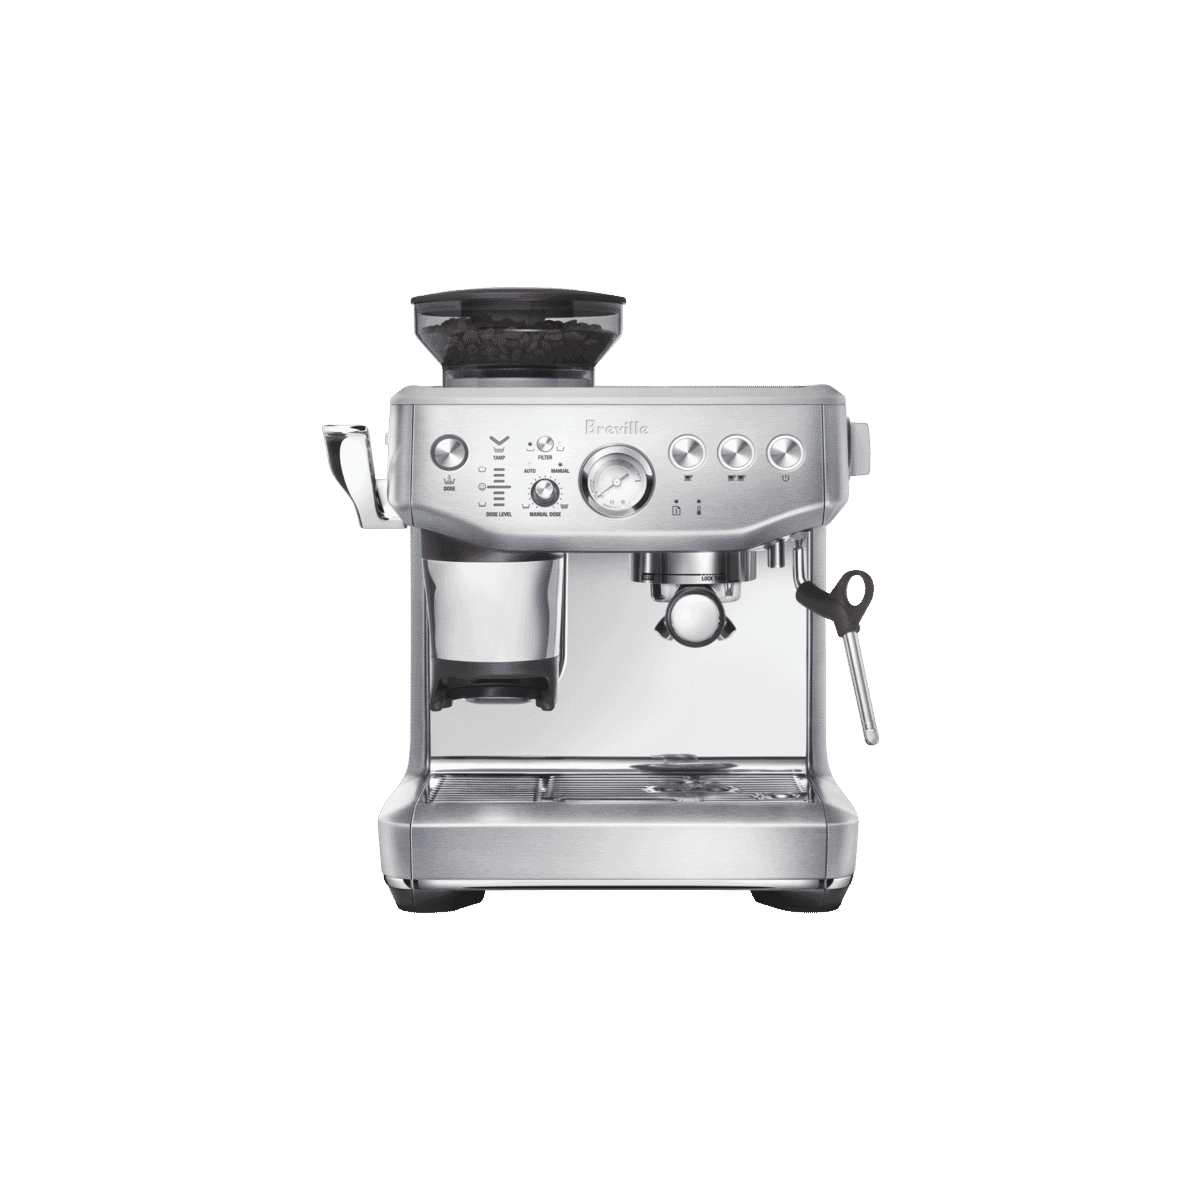 Breville BES876BSS4IAN1 Barista Express Impress Brushed Stainless Steel at The Good Guys